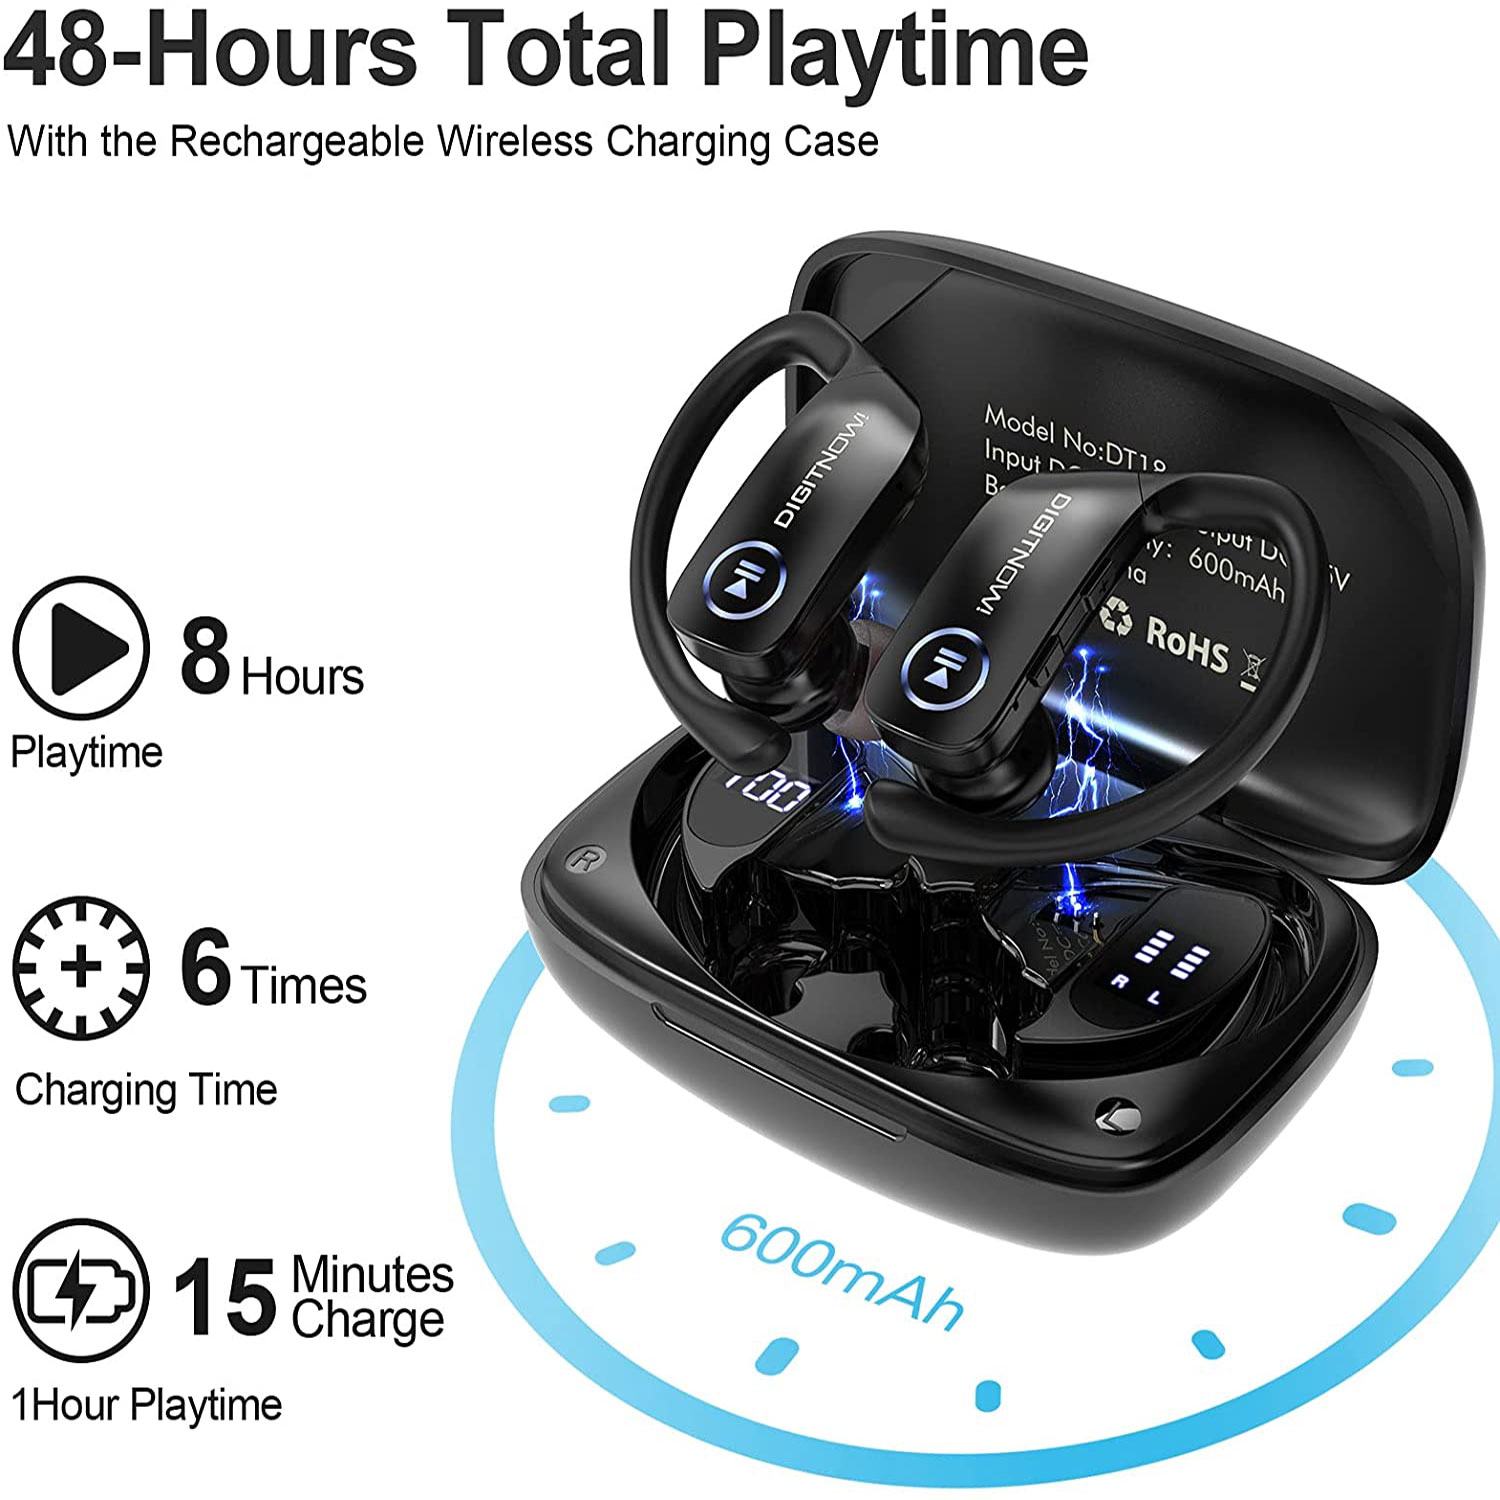 DIGITNOW Wireless Earbuds Bluetooth 5.0 Headphones 48Hrs Play Back Touch Control with LED Display Charging Case Waterproof Stereo Earphones in-Ear Built-in Mic Headset Deep Bass for Sport Workout